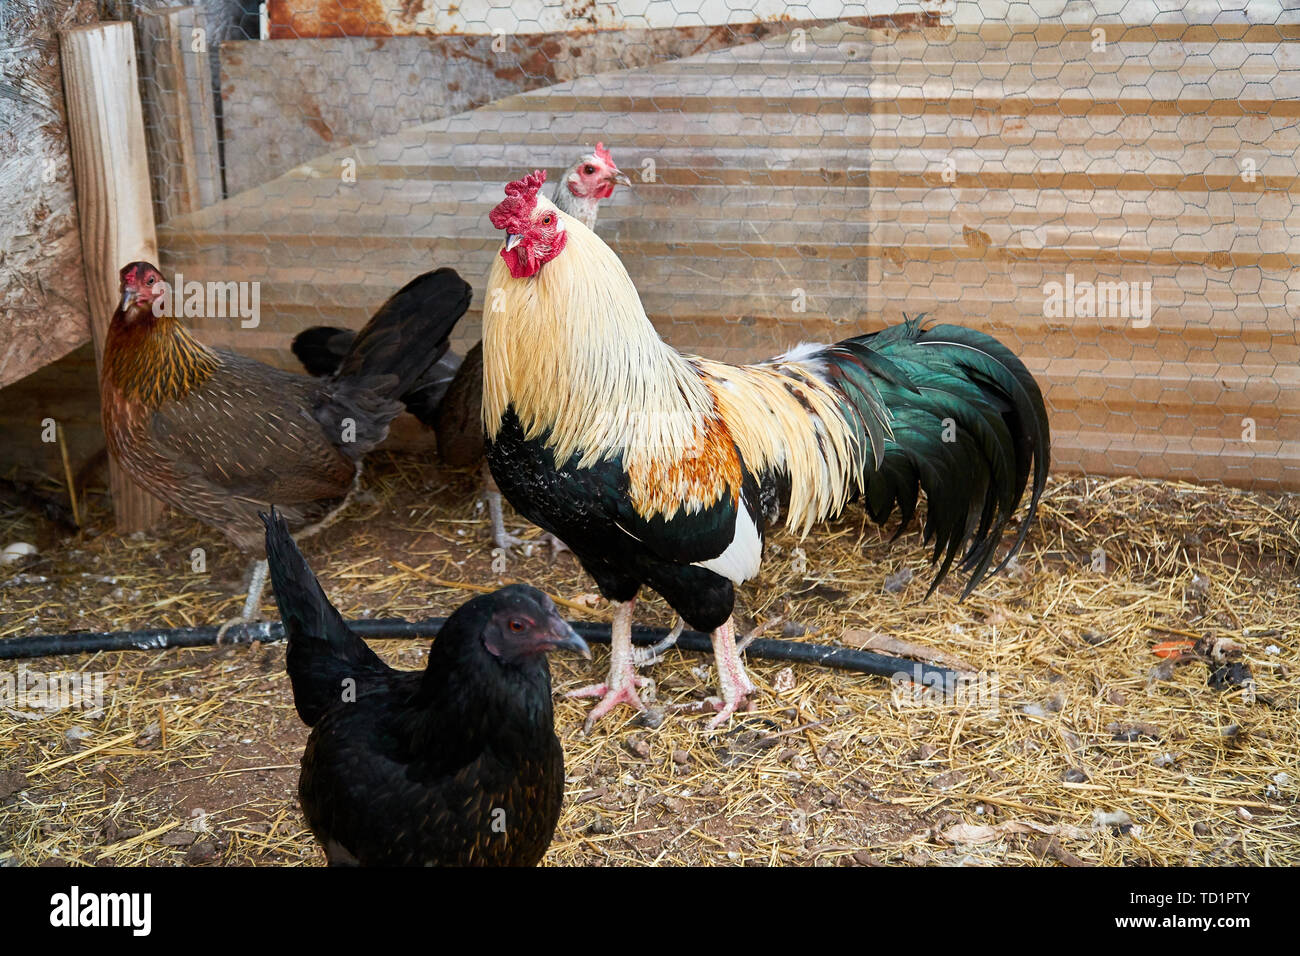 Majestic golden duckwing rooster cock special breed rare Cubalaya Stock Photo